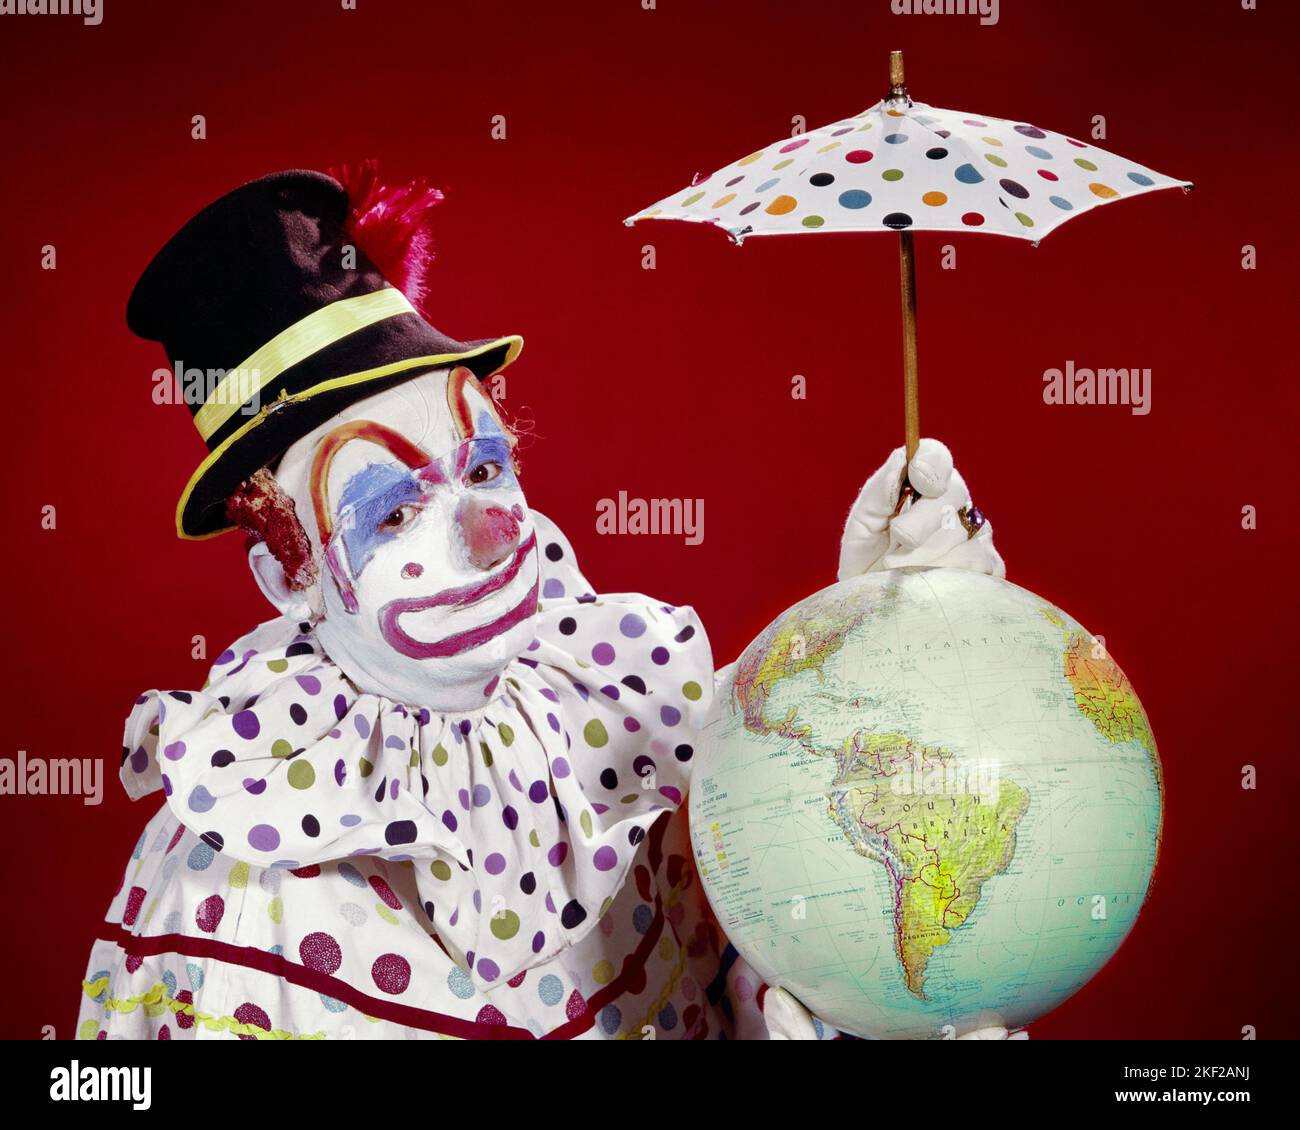 1960s CIRCUS CLOWN WEARING POLKA DOT COSTUME HOLDING A TINY PROTECTIVE UMBRELLA OVER GLOBE OF THE EARTH LOOKING AT CAMERA - kc2783 HAR001 HARS ENTERTAINMENT PROTECTIVE CLOWNS EYE CONTACT DOT GOALS PERFORMING ARTS HUMOROUS ADVENTURE ENVIRONMENT PERFORMER POLKA PROTECTION STRATEGY MAKE UP COMICAL ENTERTAINER OCCUPATIONS WHITEFACE CONCEPTUAL POLKA DOT CLOWN WHITE COMEDY JESTER SUPPORT TINY EARTH DAY TOP HAT FOOL HAR001 OLD FASHIONED Stock Photo